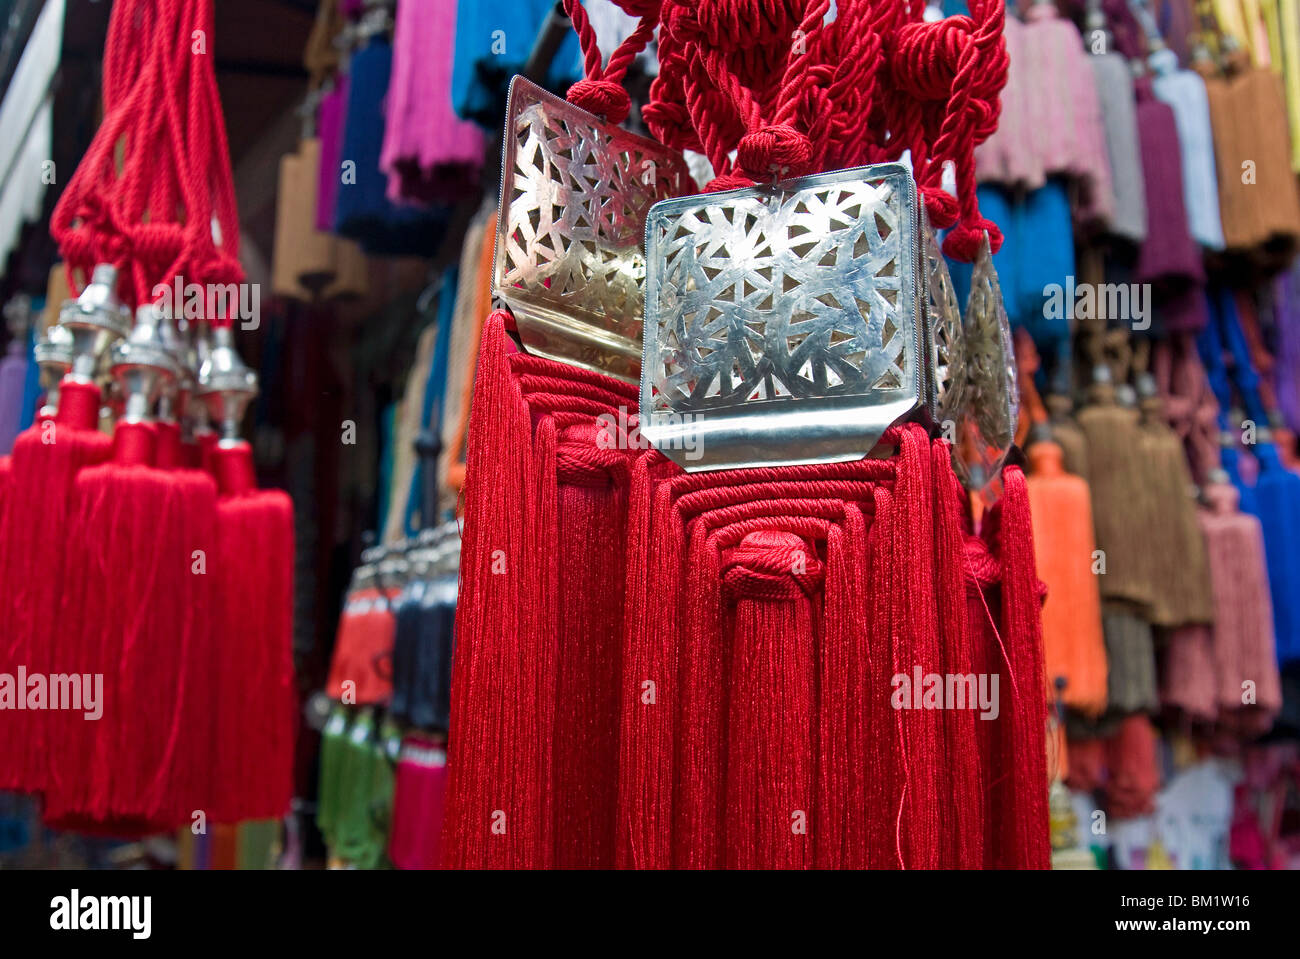 Tassels for sale in the souk, Marrakech (Marrakesh), Morocco, North Africa, Africa Stock Photo